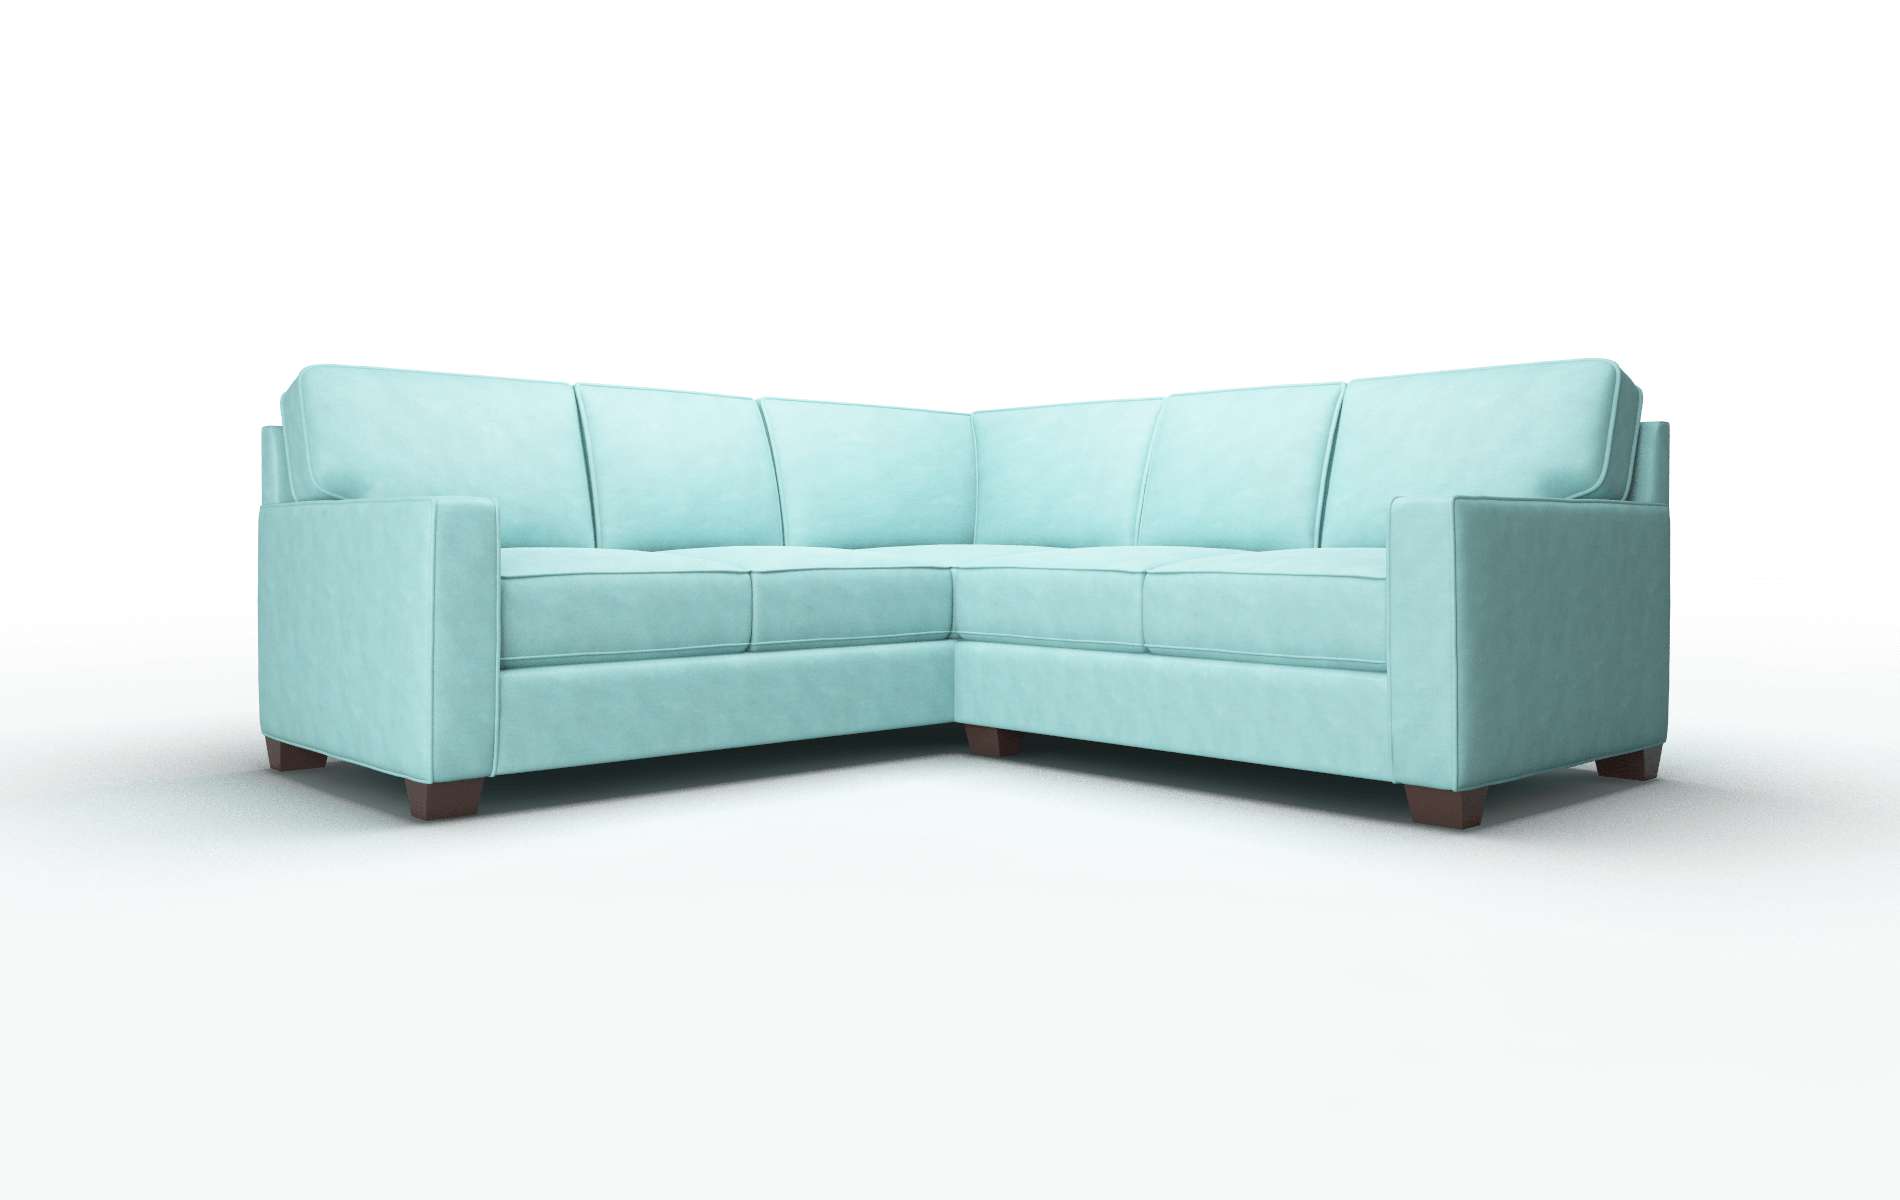 Chicago Curious Turquoise Sectional espresso legs